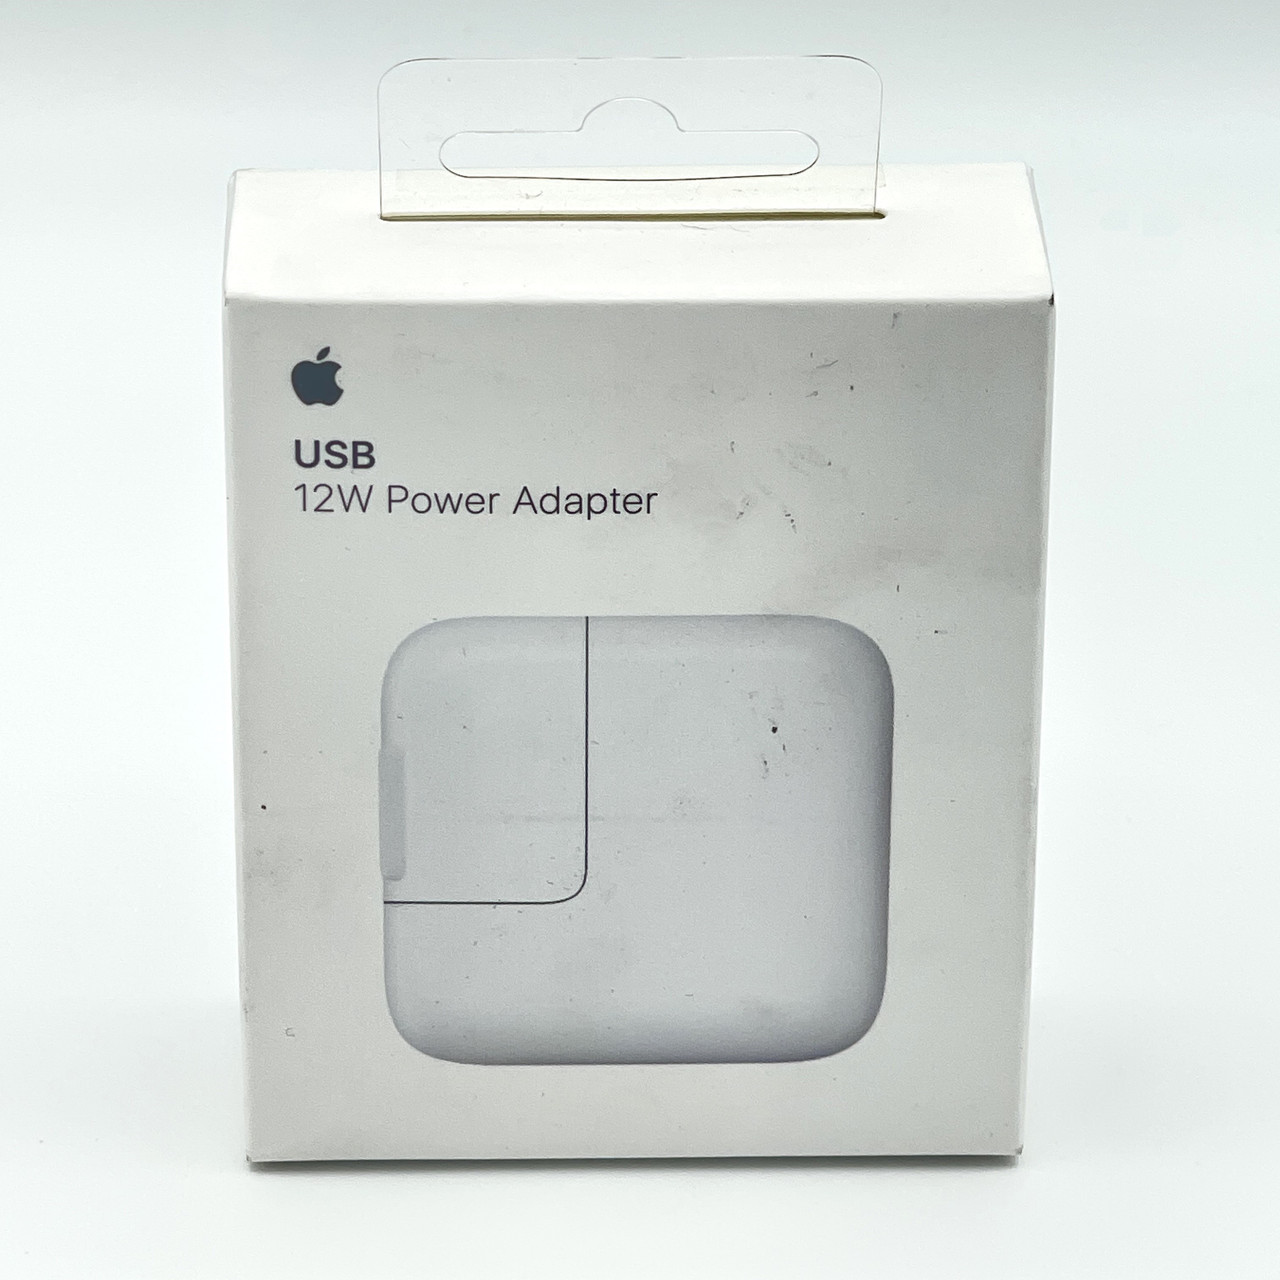 Apple USB 12W Power Adapter - Genuine OEM Charger MGN03AM/A for iPhone & iPad - 